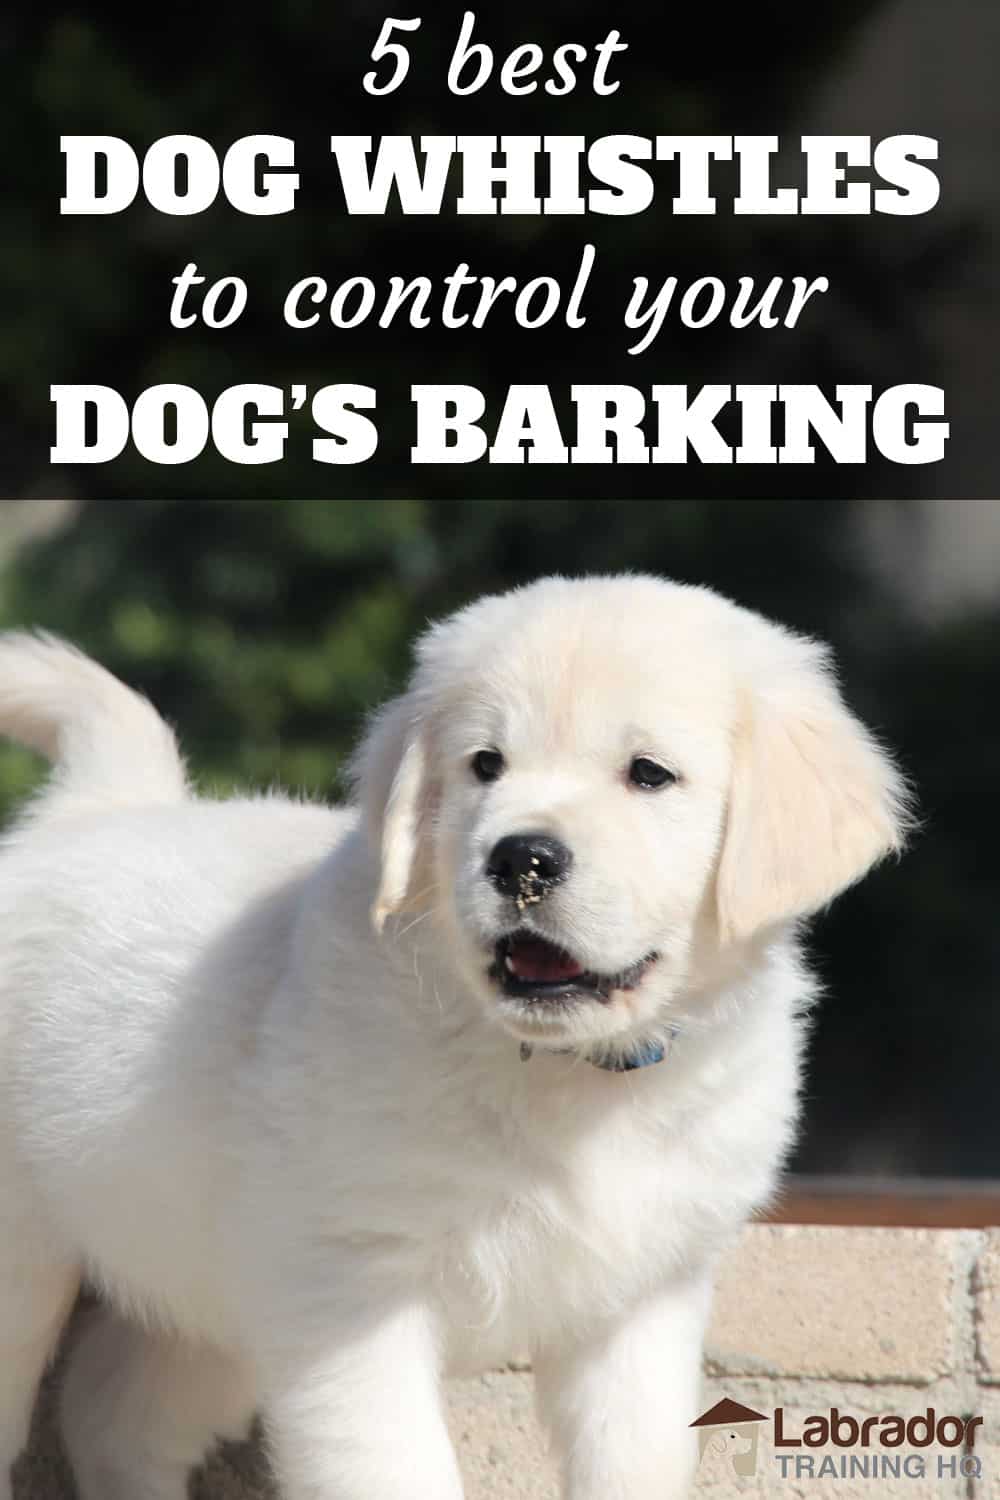 5 Best Dog Whistles To Control Your Dog's Barking White Puppy looking in distance with mouth open